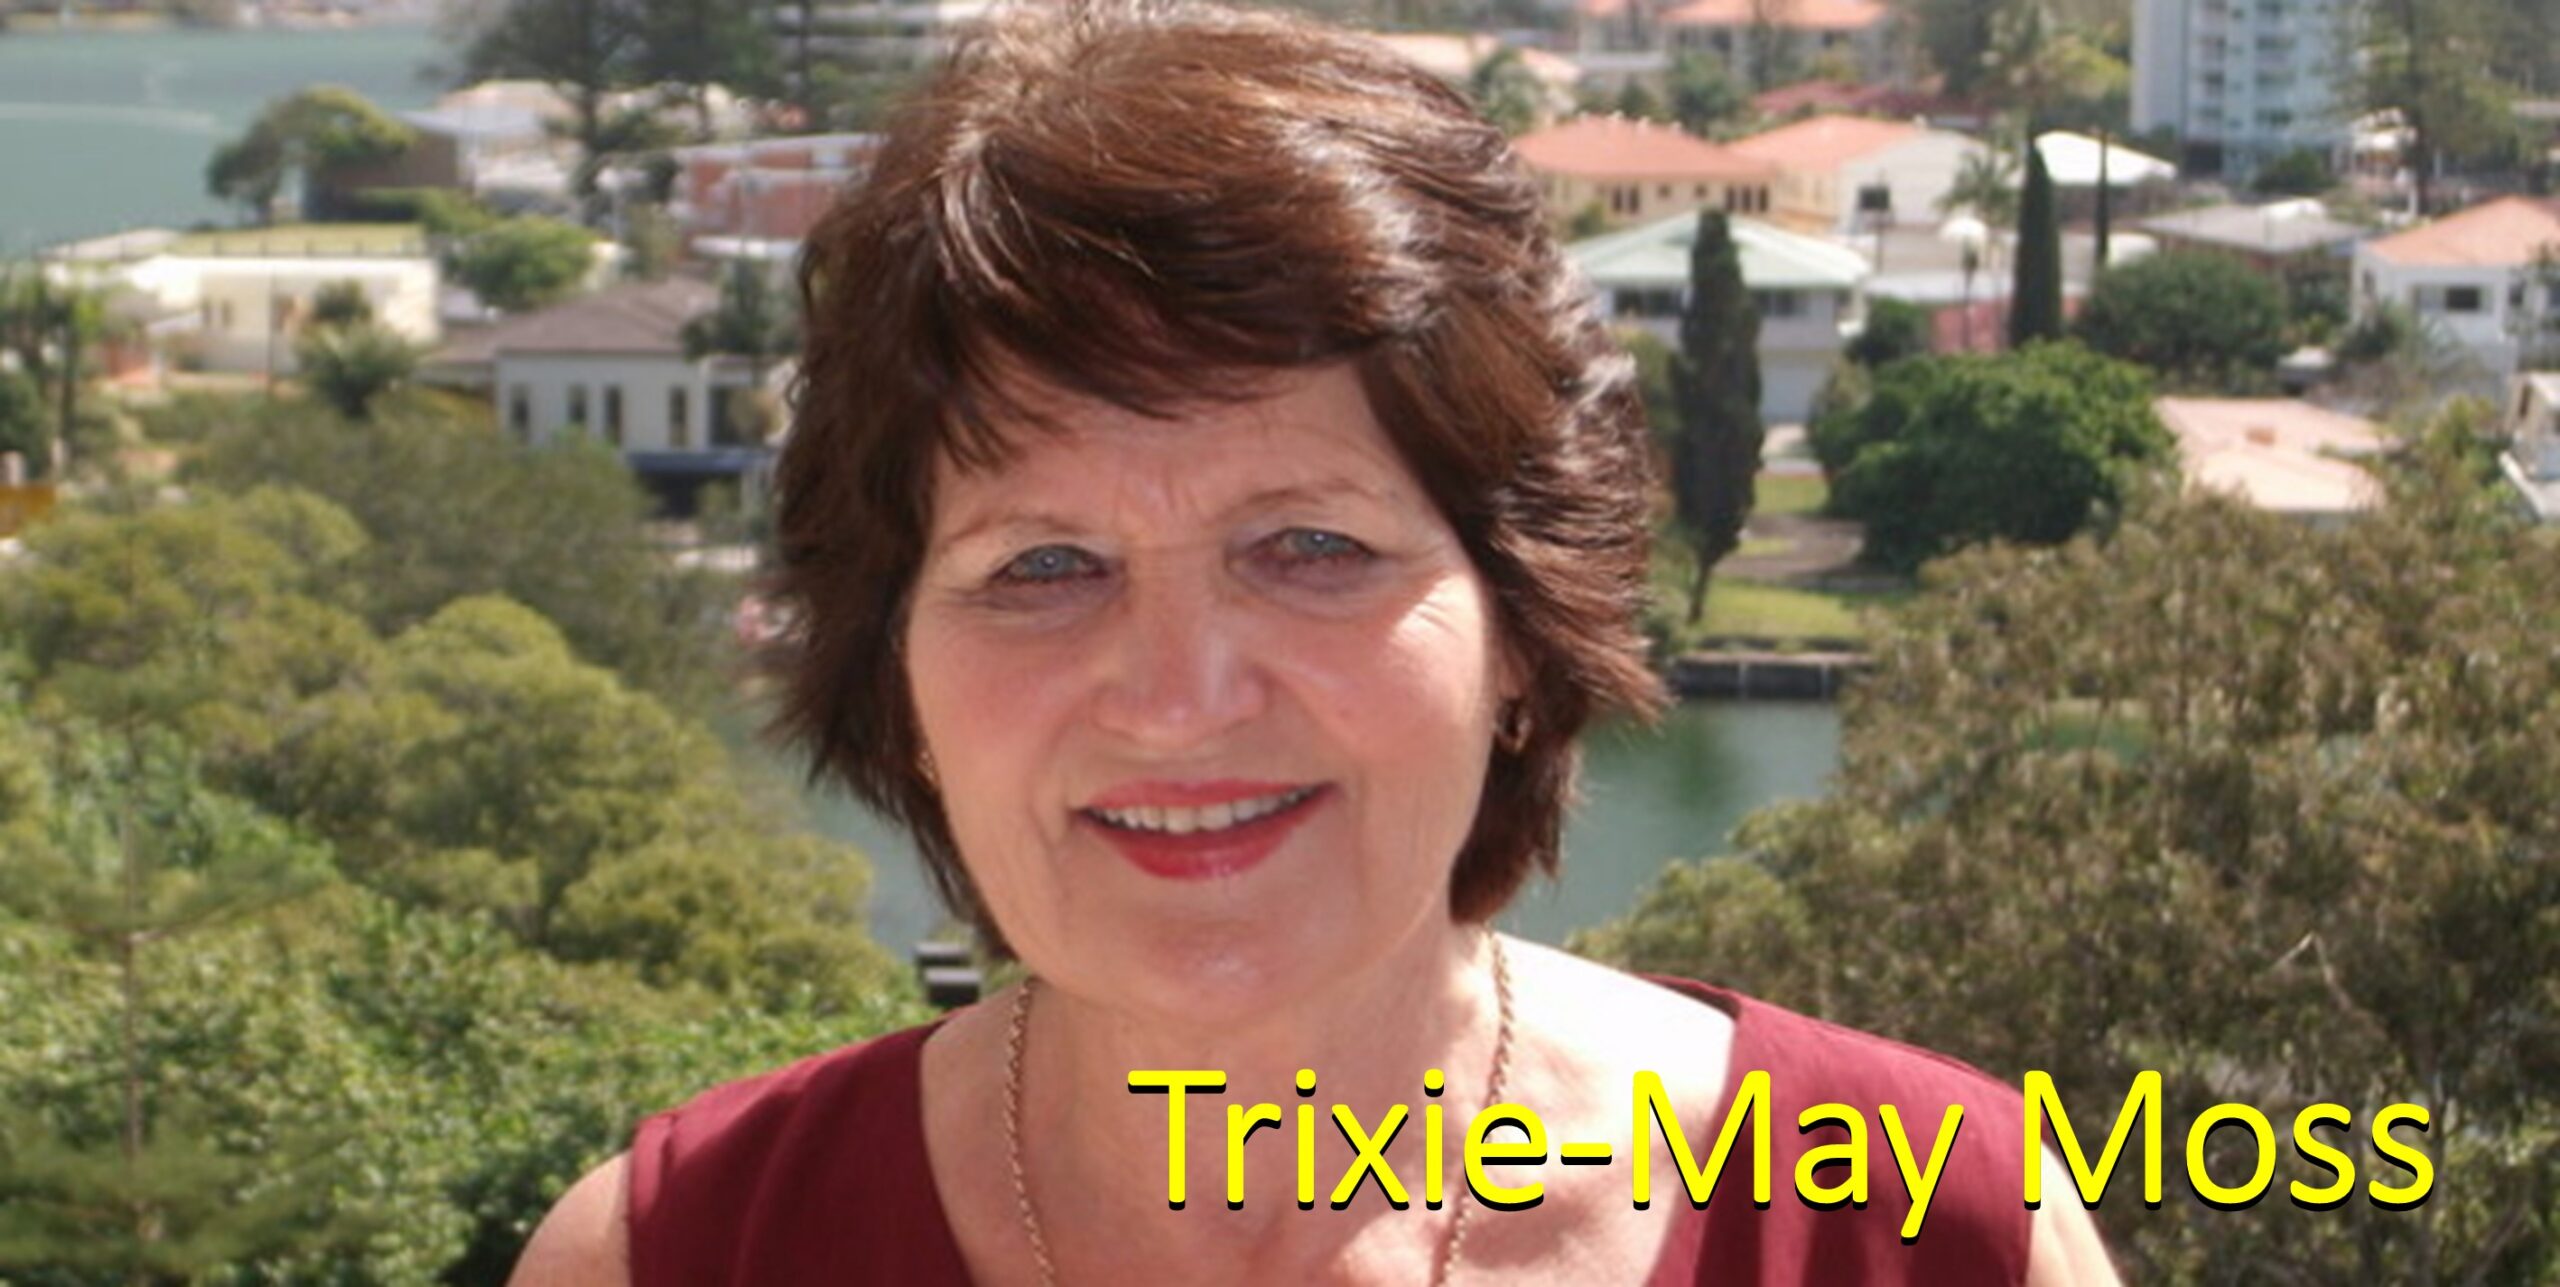 Trixie-May Moss